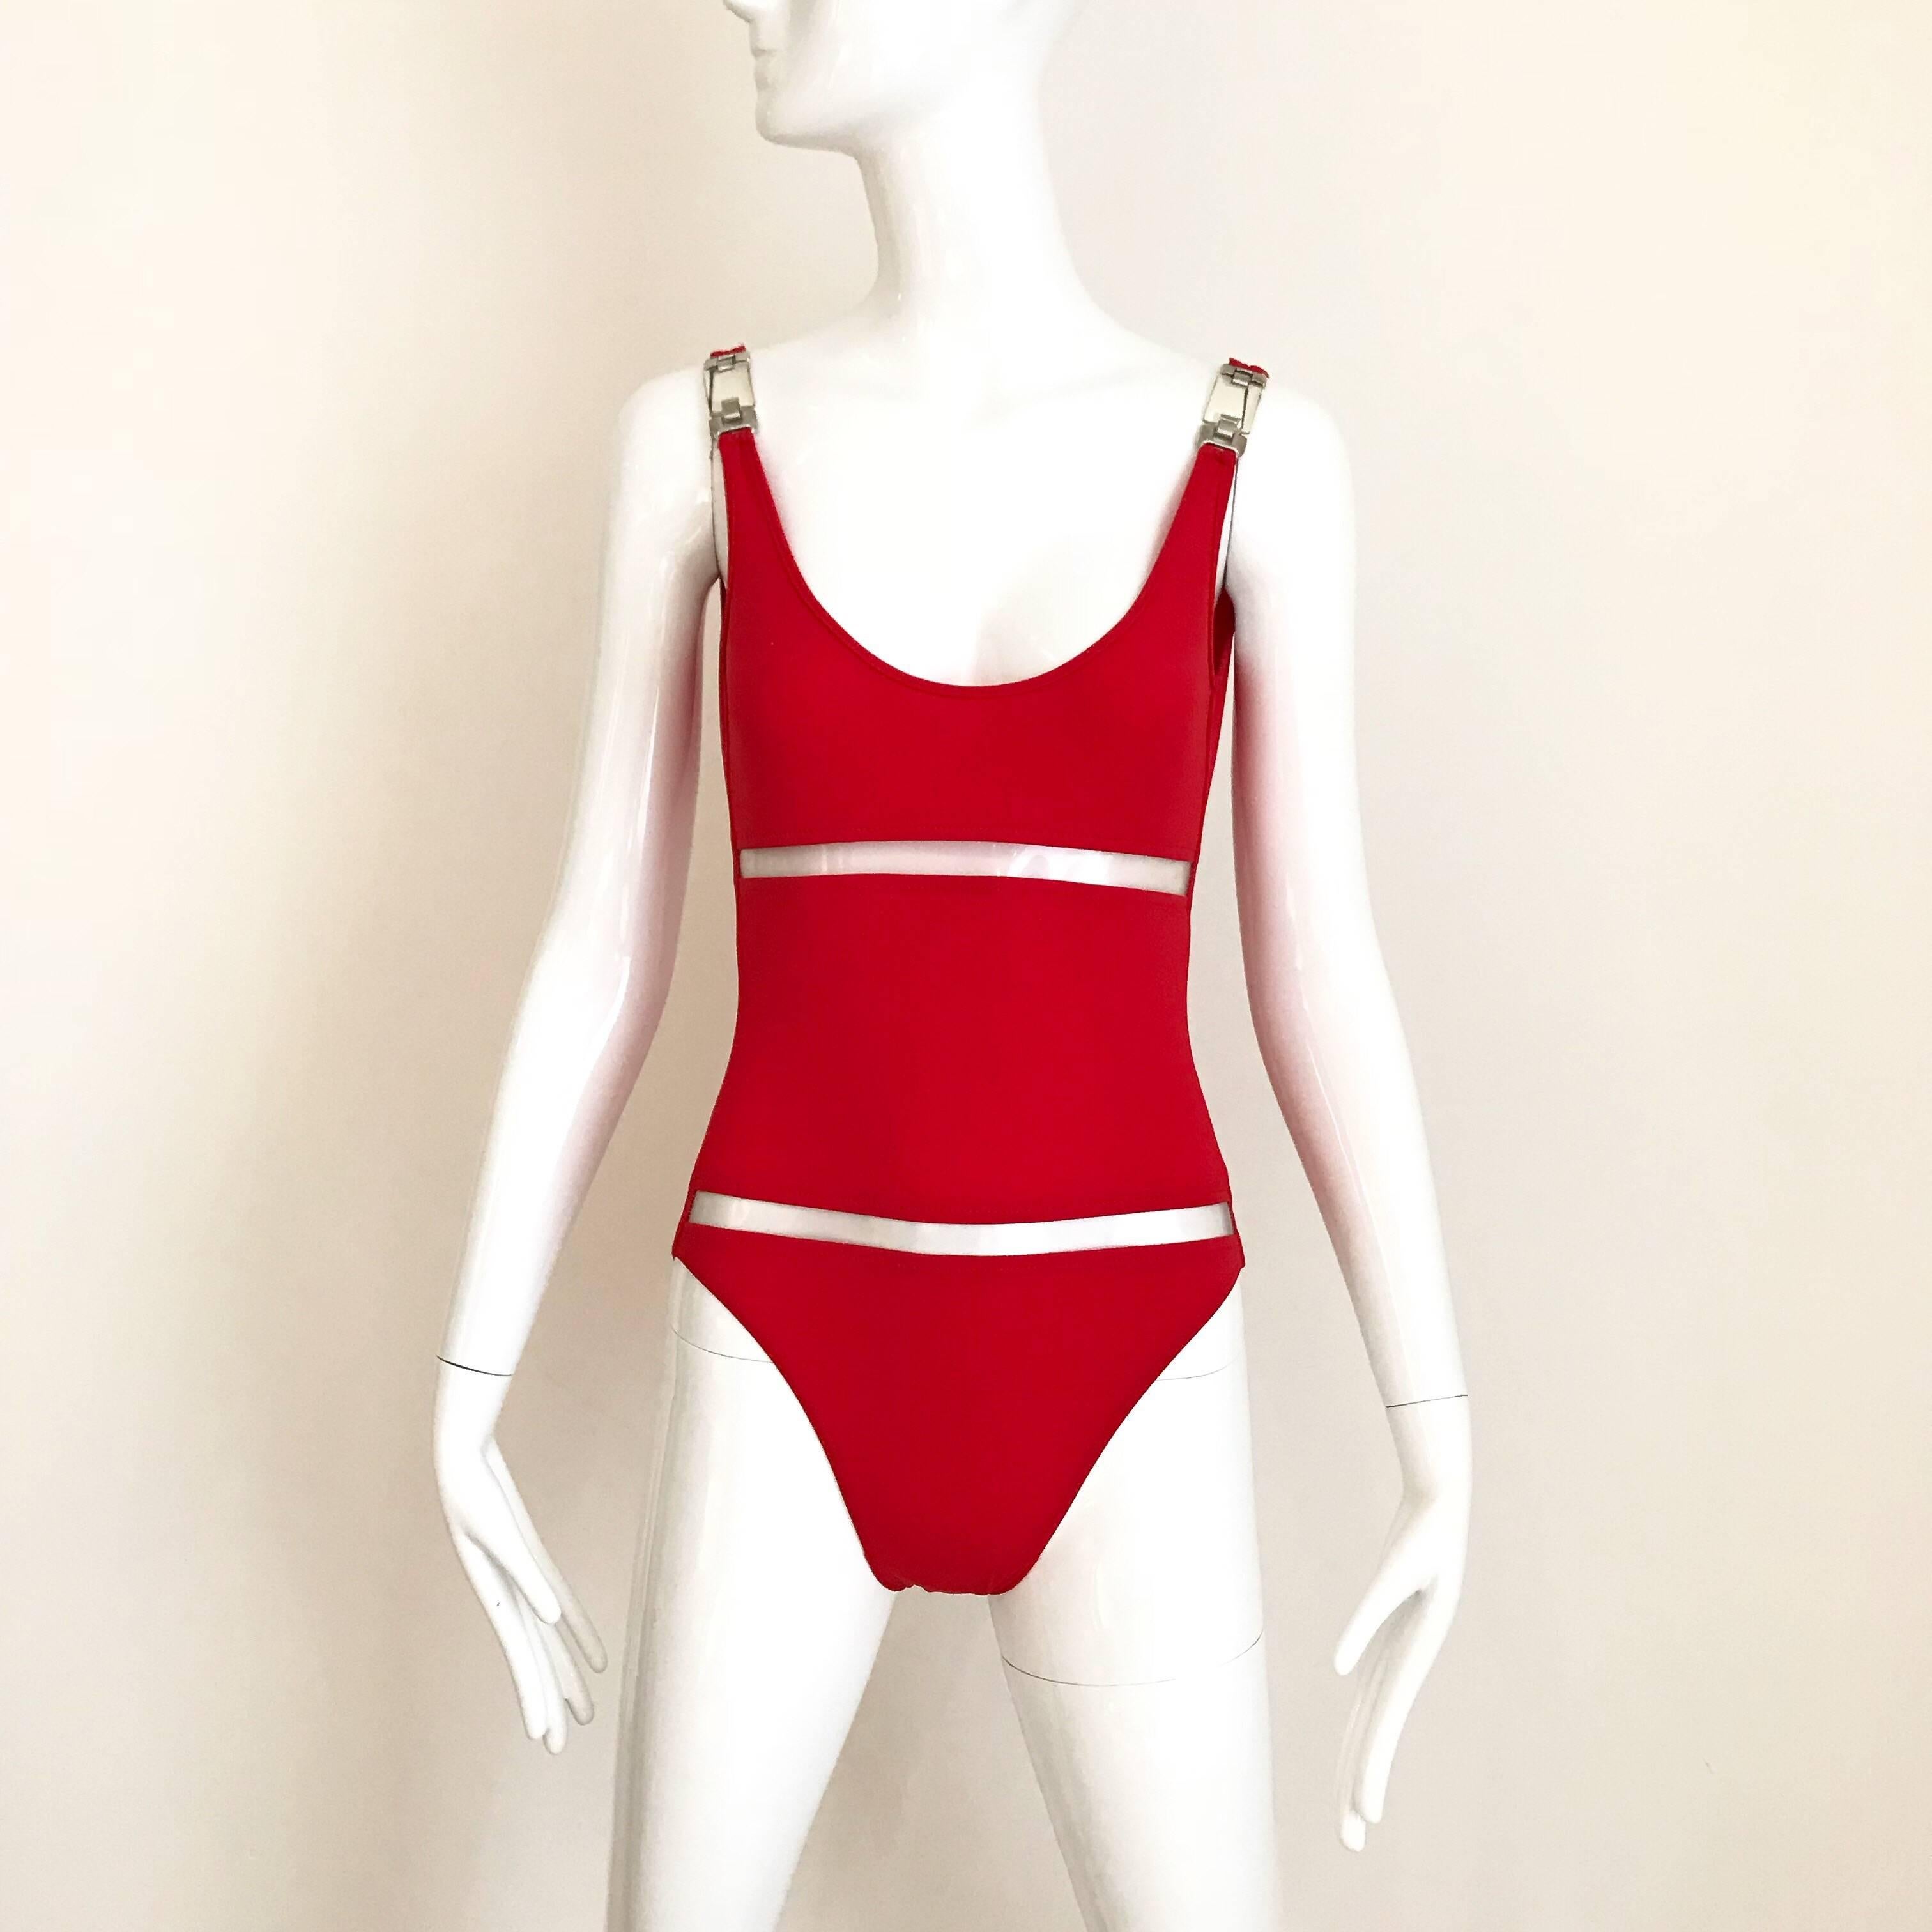 Sexy and modern chic Never wornPaco Rabanne Red lycra bathing suit swim wear.
Fit size : US 2 o 4
**Sielian Vintage